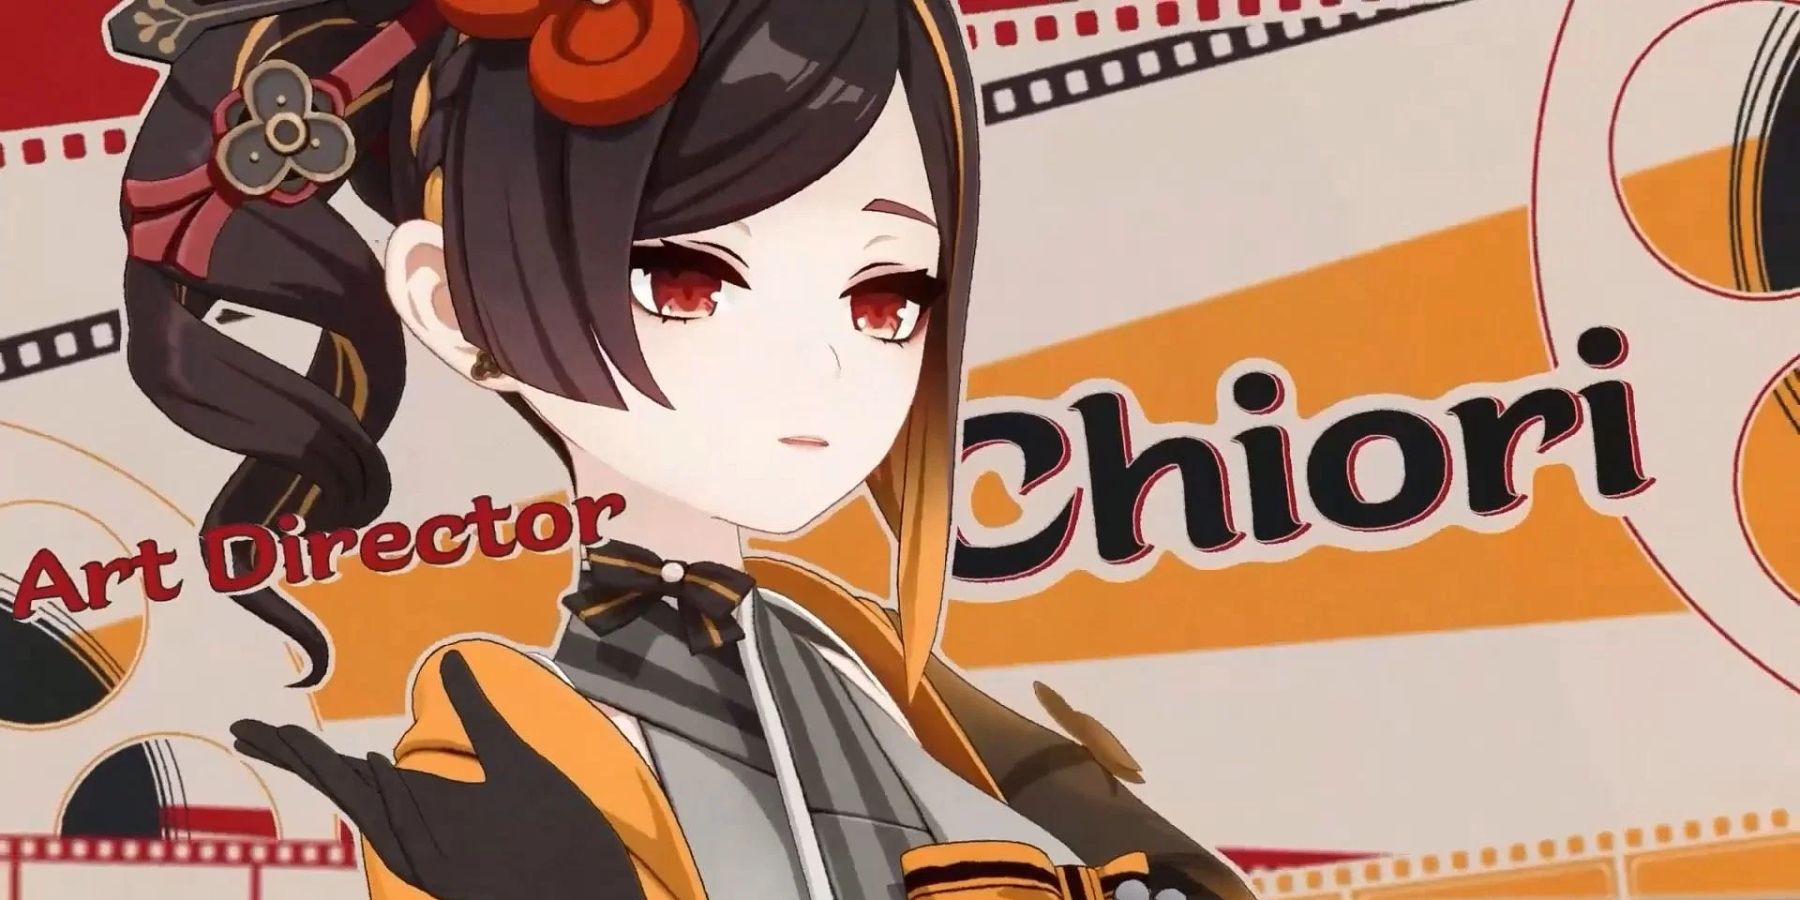 A screenshot from Genshin Impact's Version 4.3 trailer. The image shows new character Chiori.